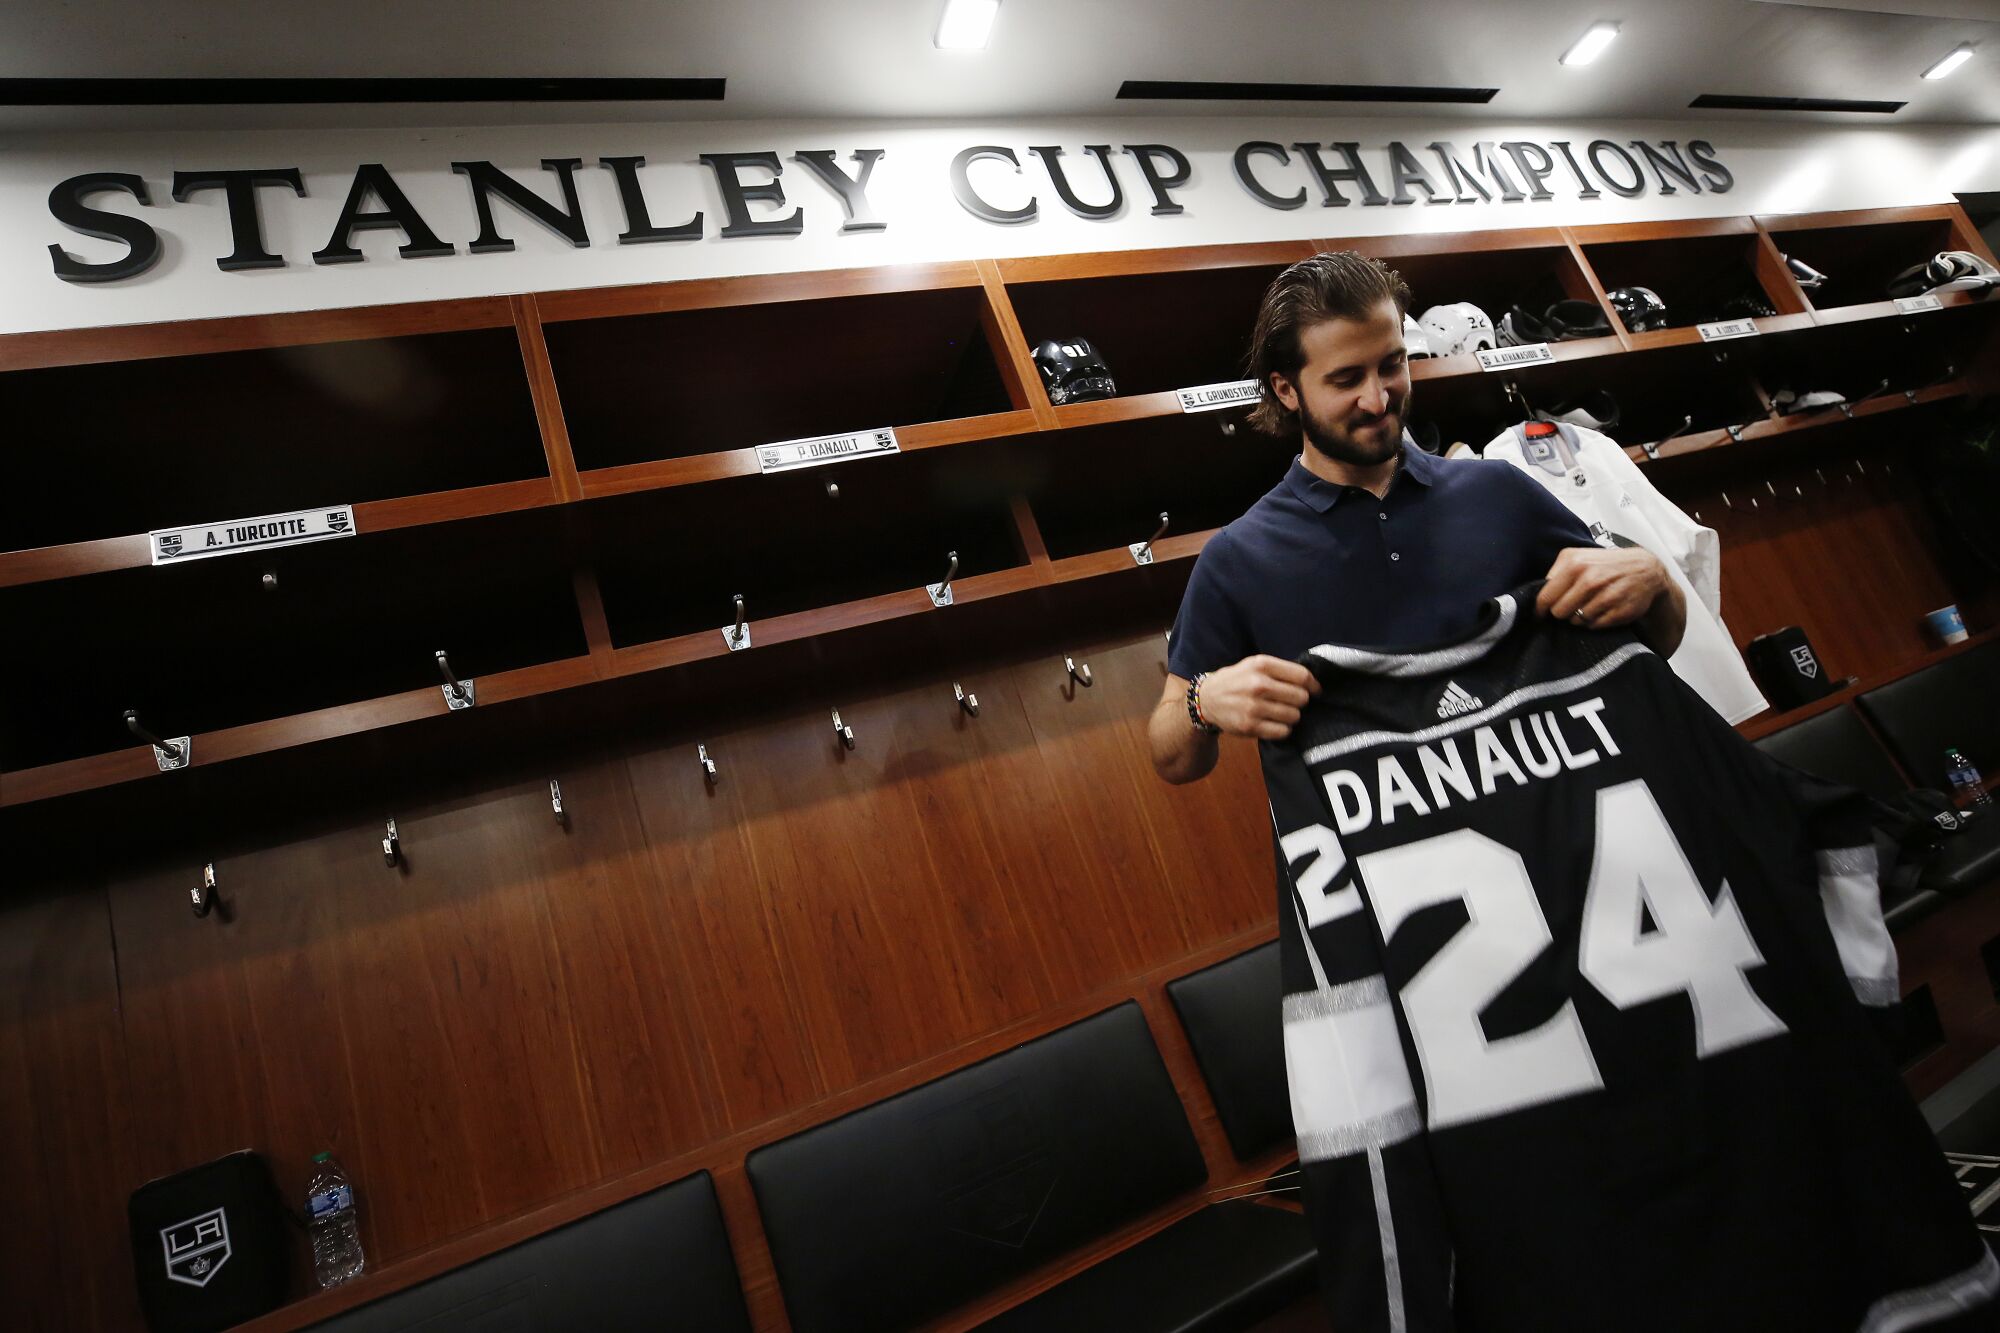 Los Angeles Kings player Phillip Danault holds his team jersey in the locker room of the L.A. Kings practice facility